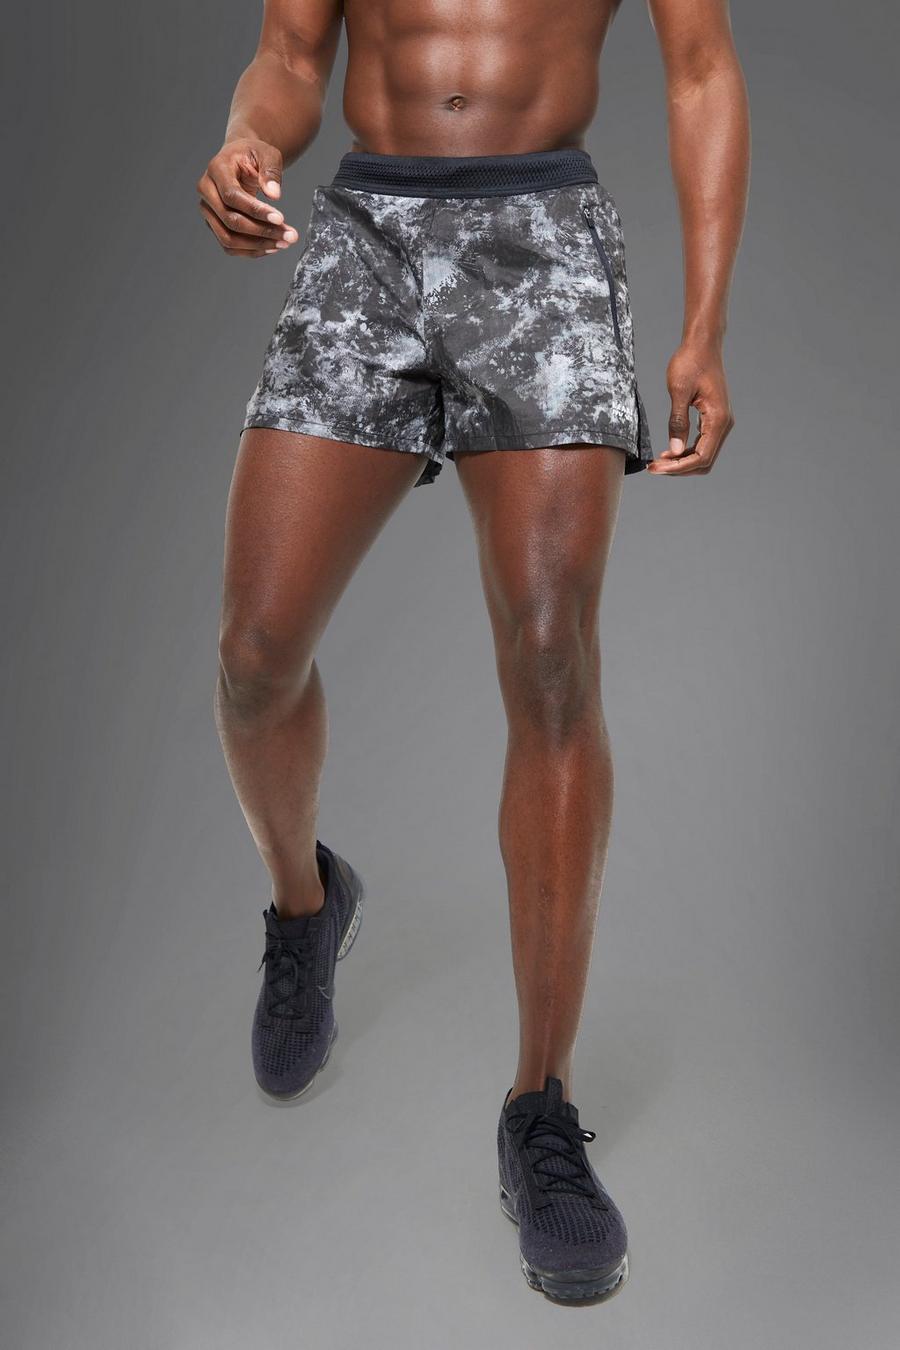 Black Man Active  Abstract  2 In 1  Runner Shorts